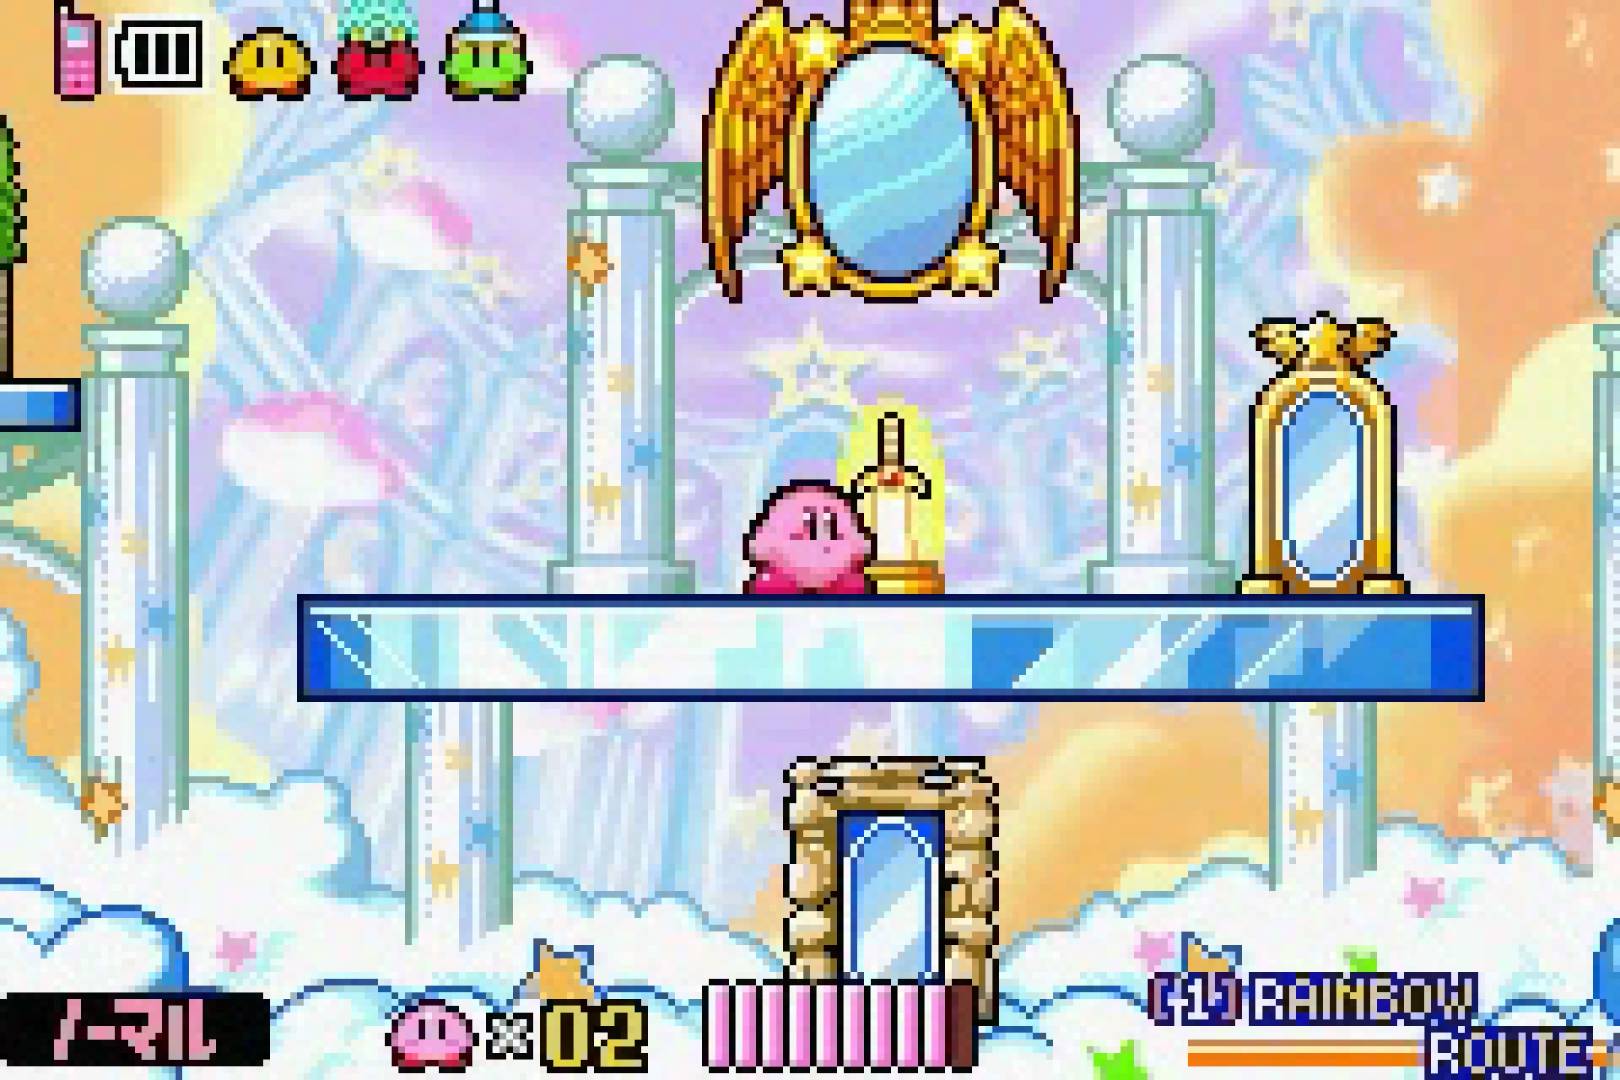 Kirby & The Amazing Mirror Backgrounds, Compatible - PC, Mobile, Gadgets| 1620x1080 px